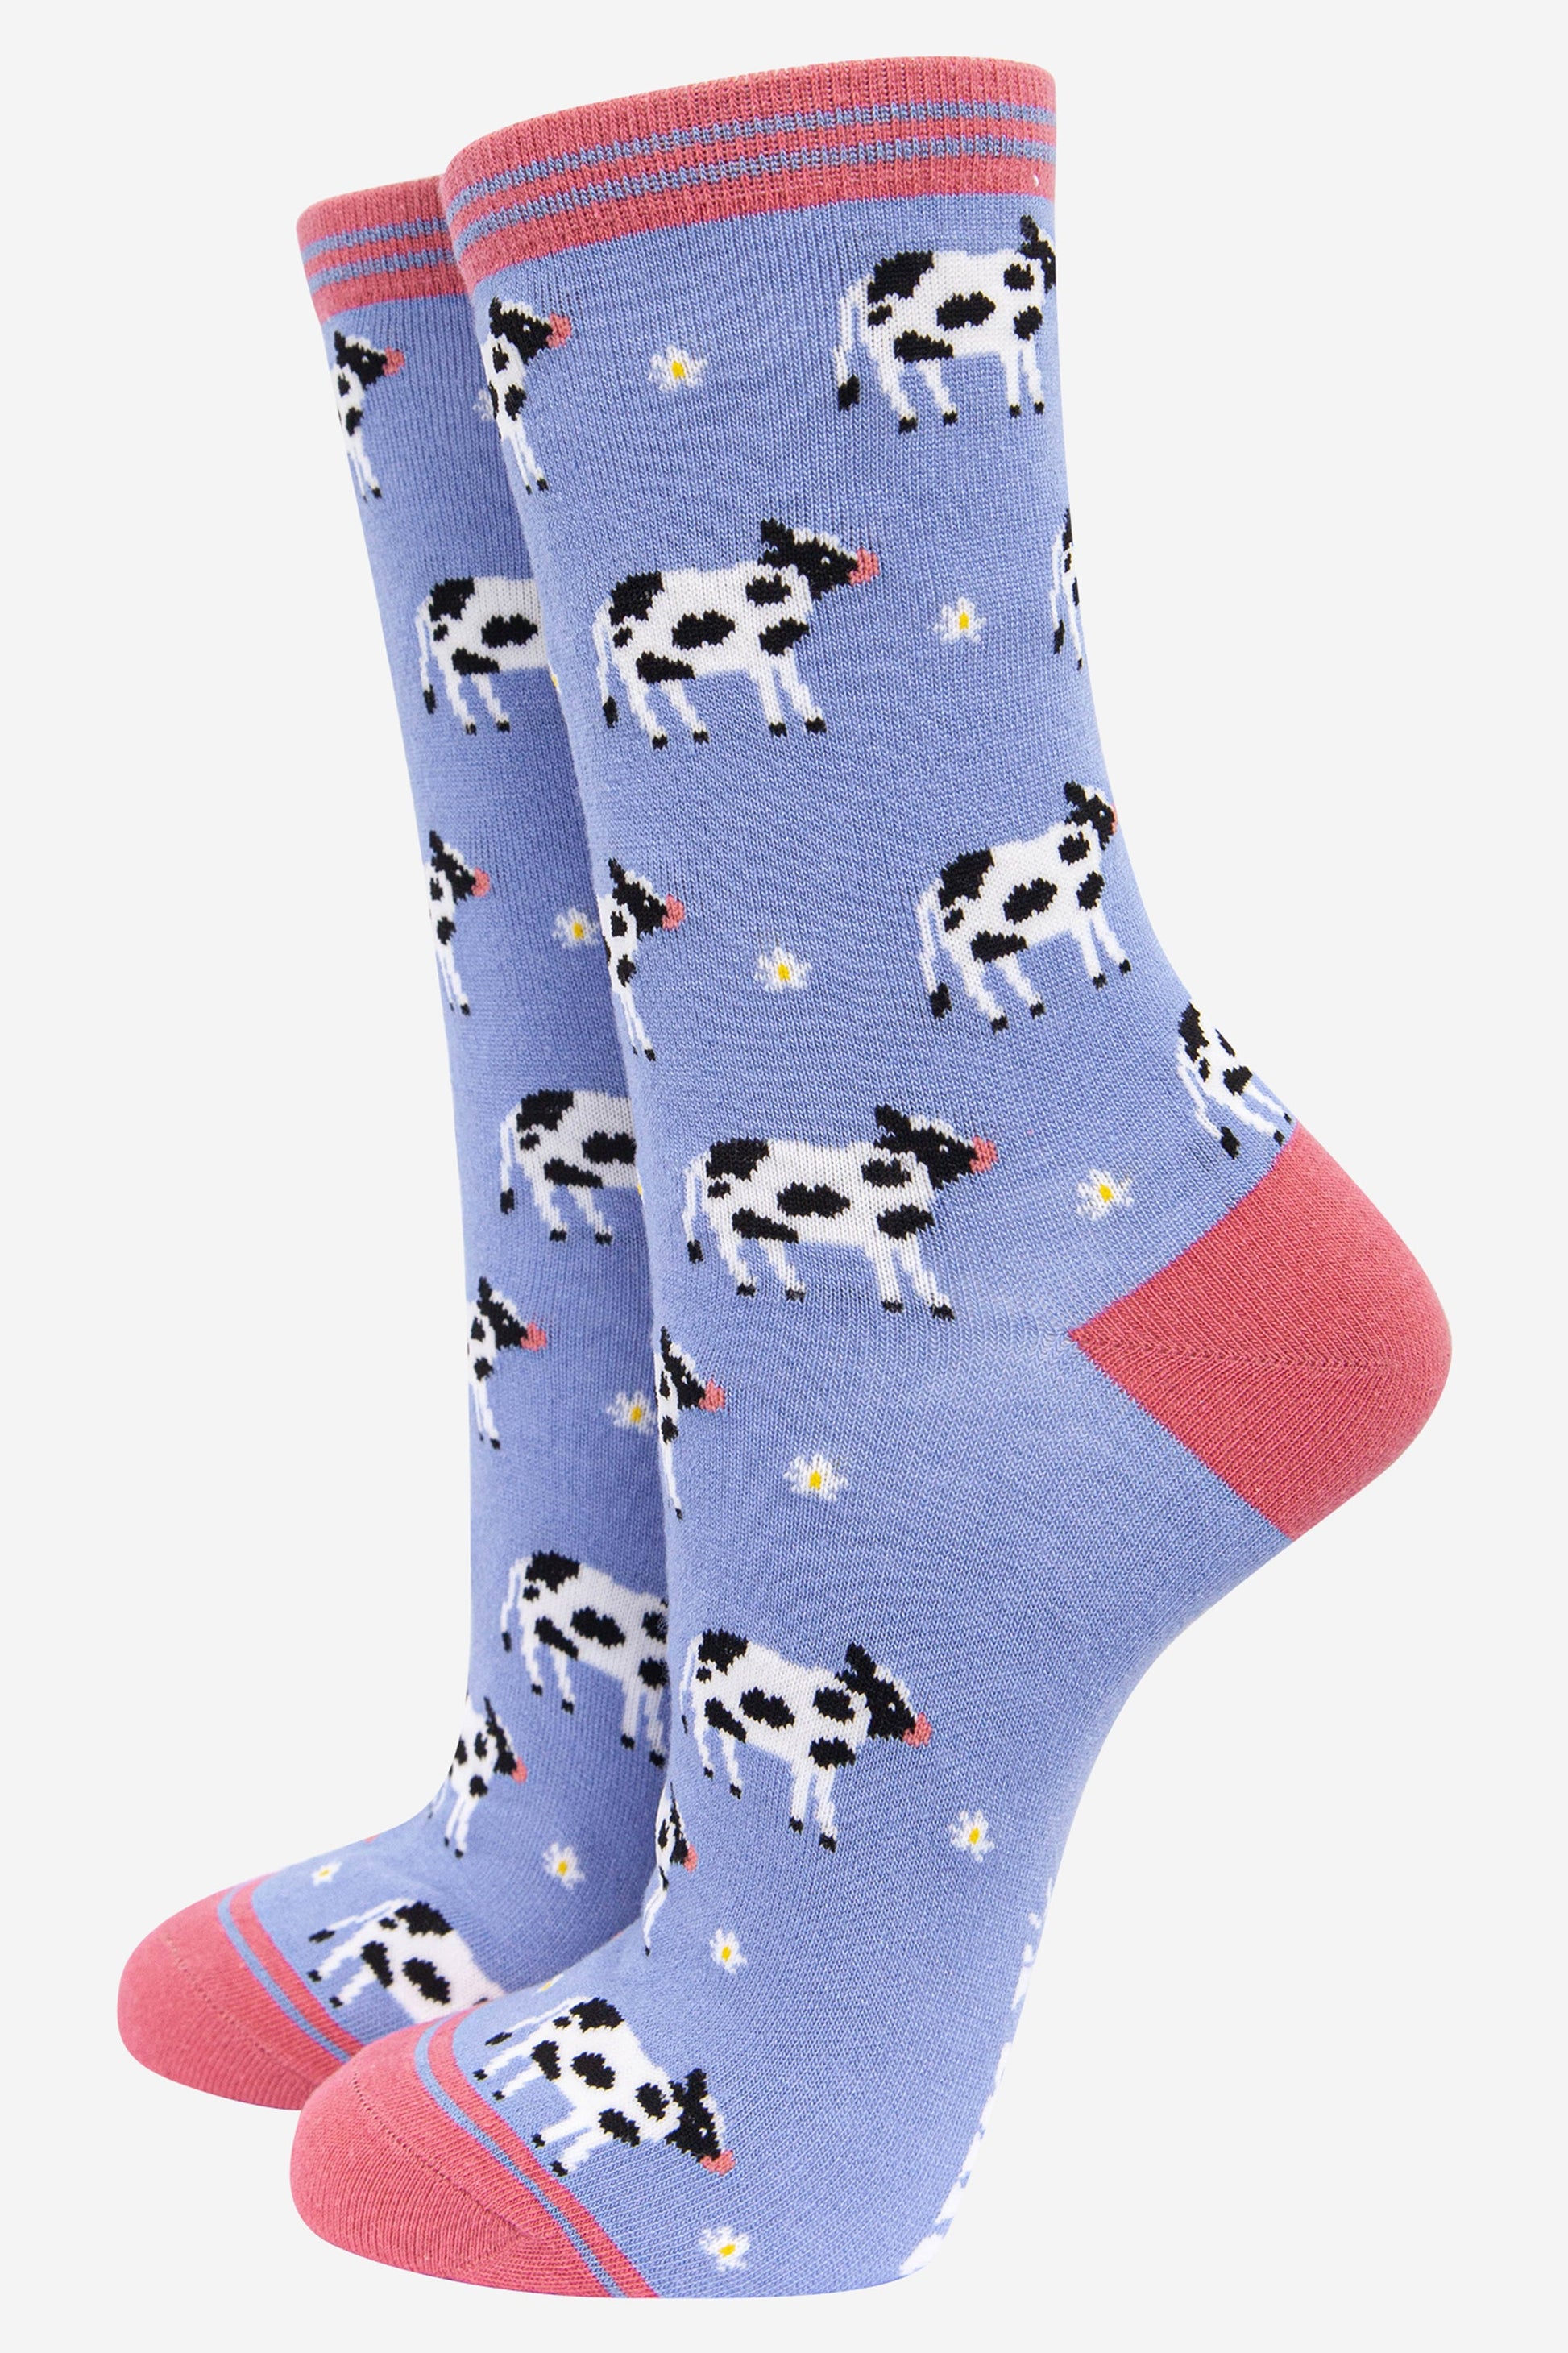 lilac and pink bamboo socks with an all over pattern of black and white cows and daisy flowers